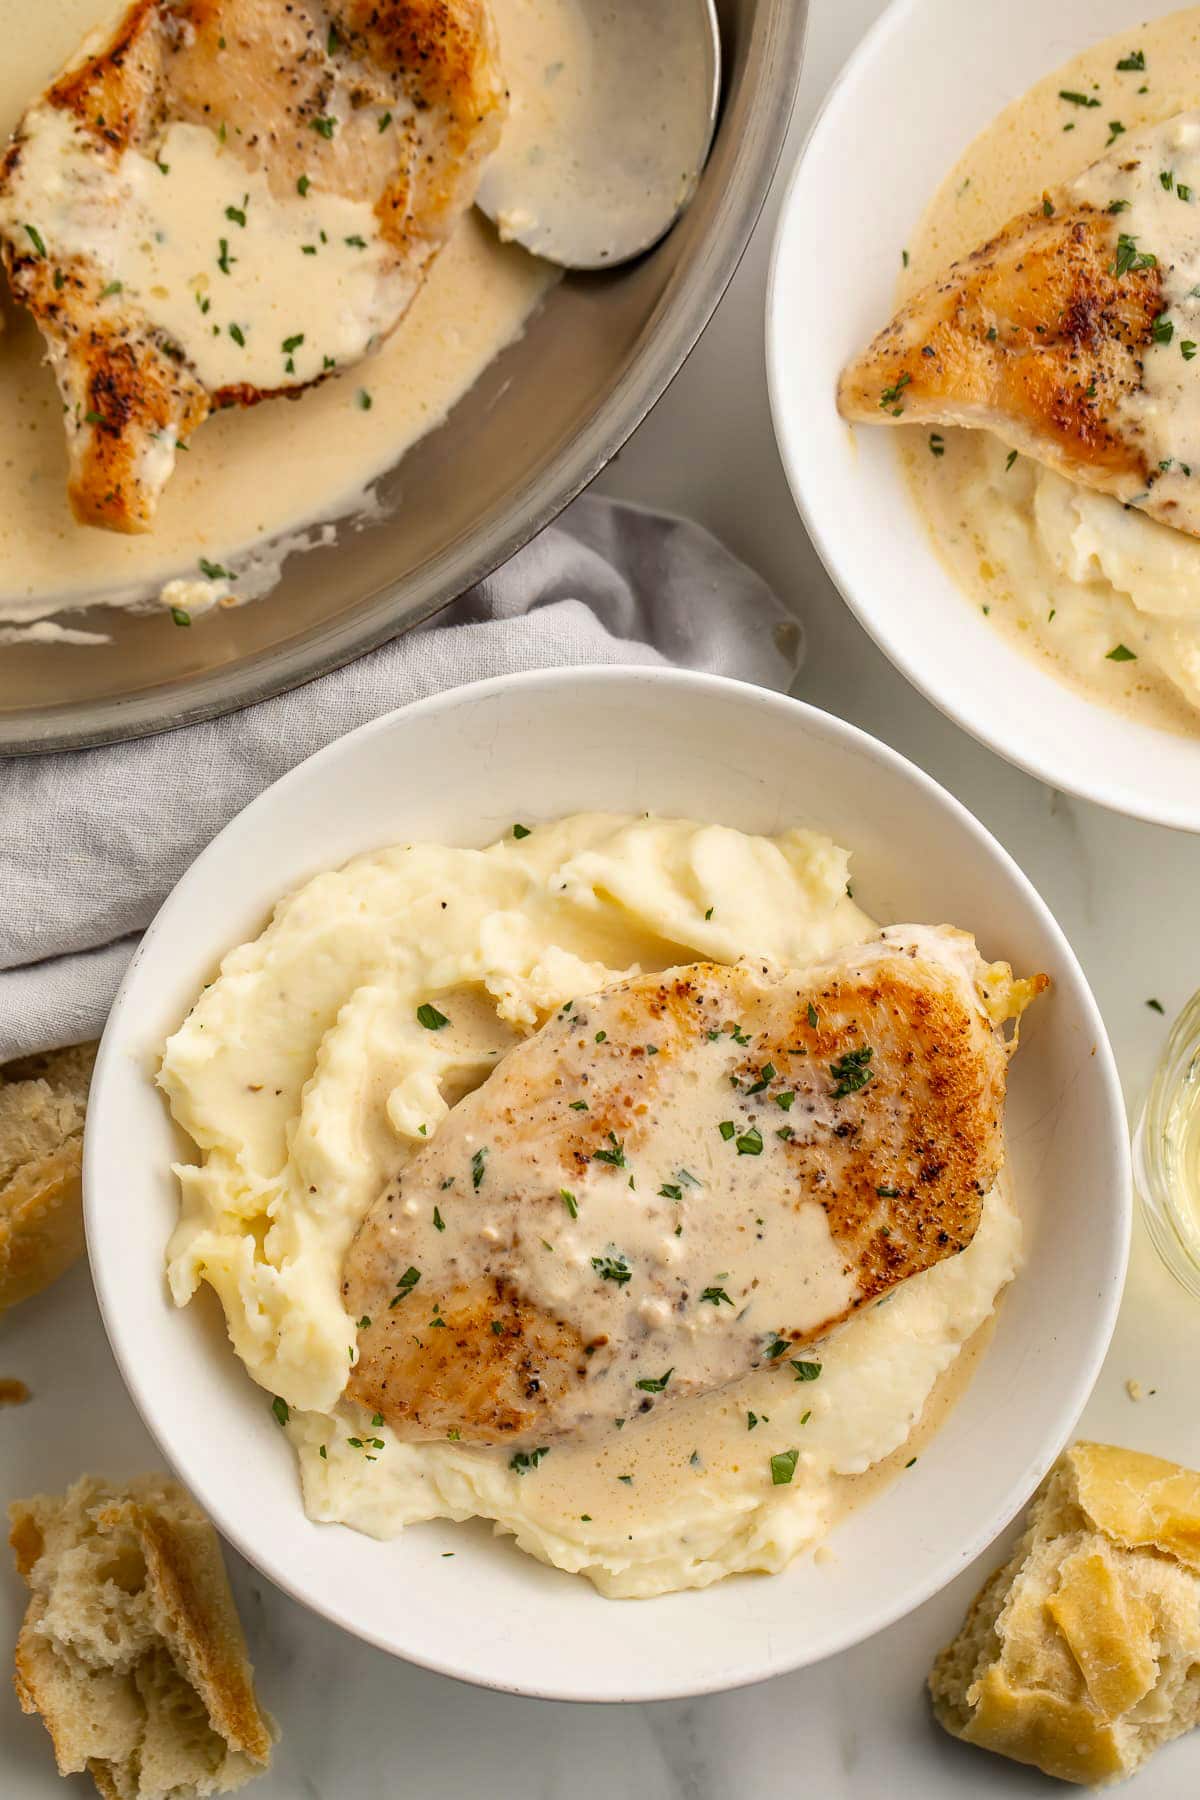 Top-down look at two bowls of mashed potatoes topped with cream cheese garlic skillet chicken and creamy sauce next to a large skillet.